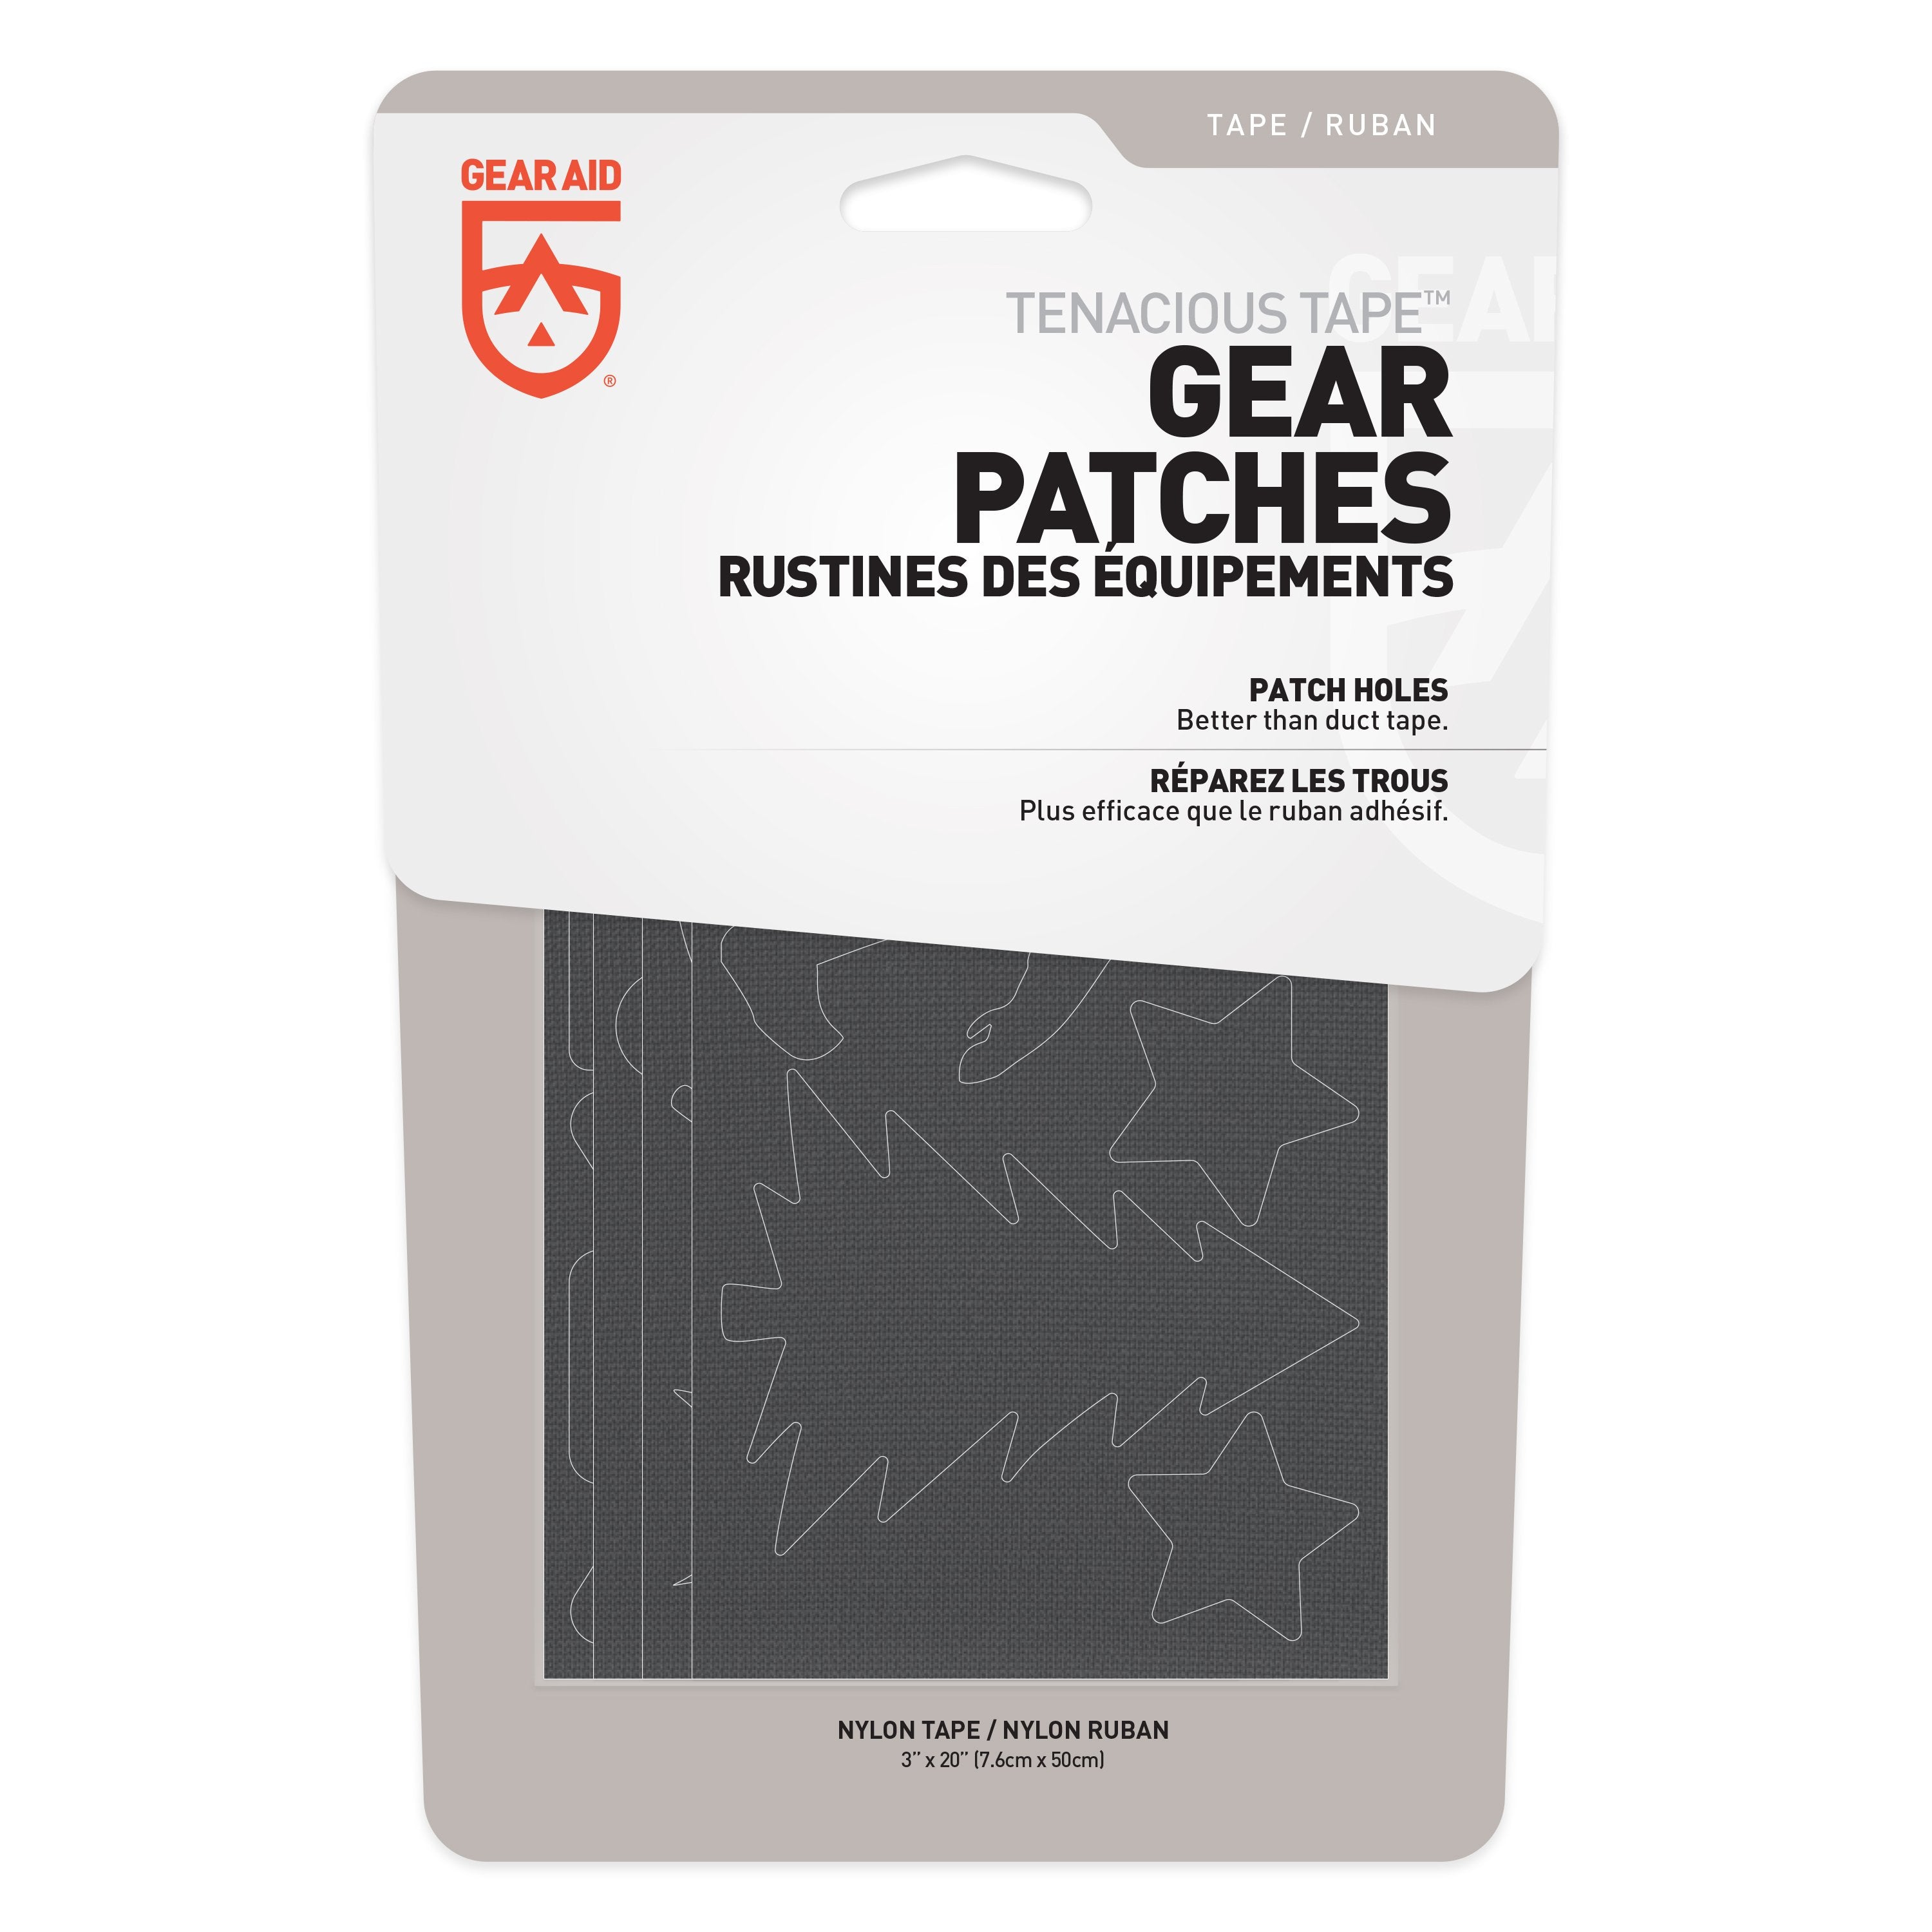 Gear Aid Tenacious Tape Gear Patches (Outdoors)